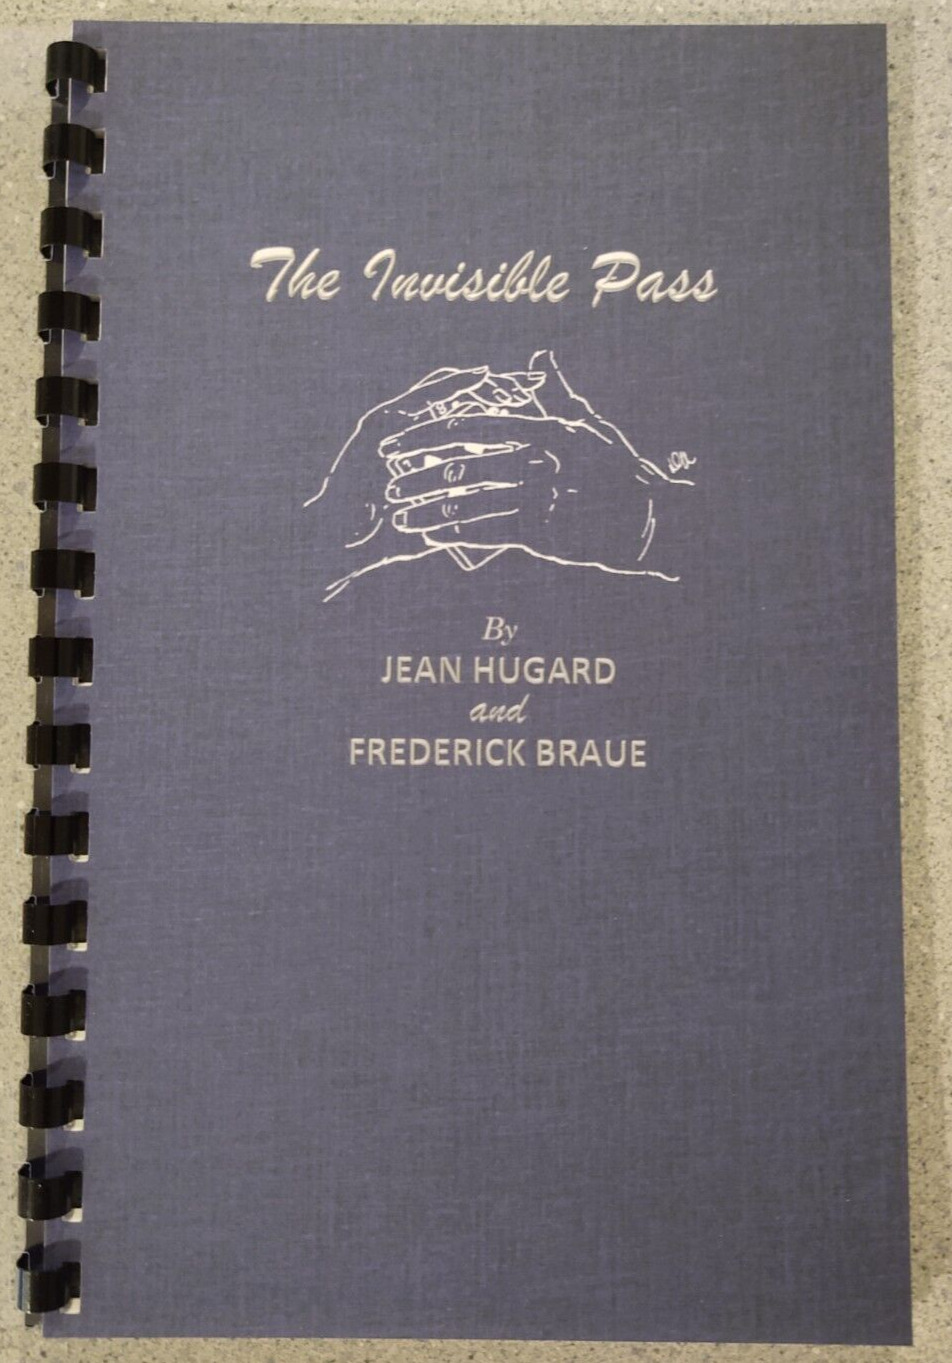 The Invisible Pass by Hugard and Braue